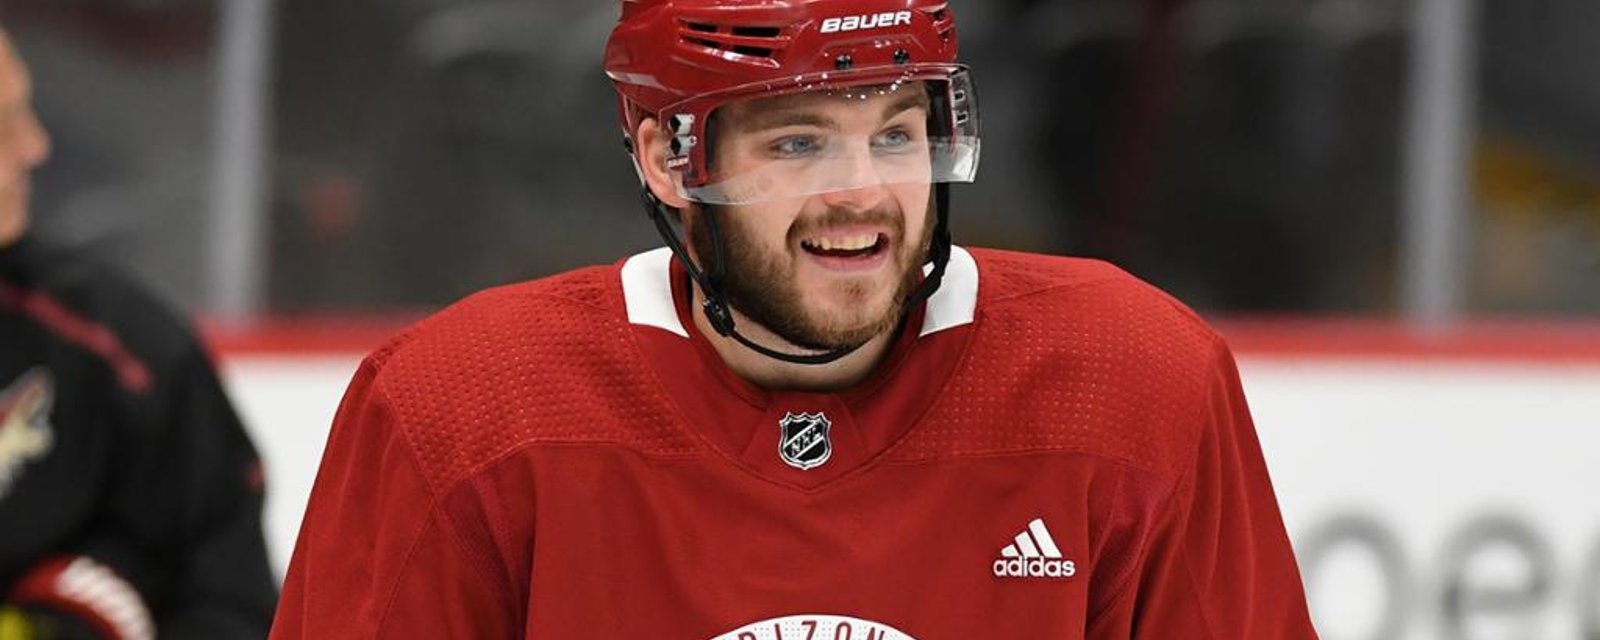 New contract for Alex Galchenyuk! 